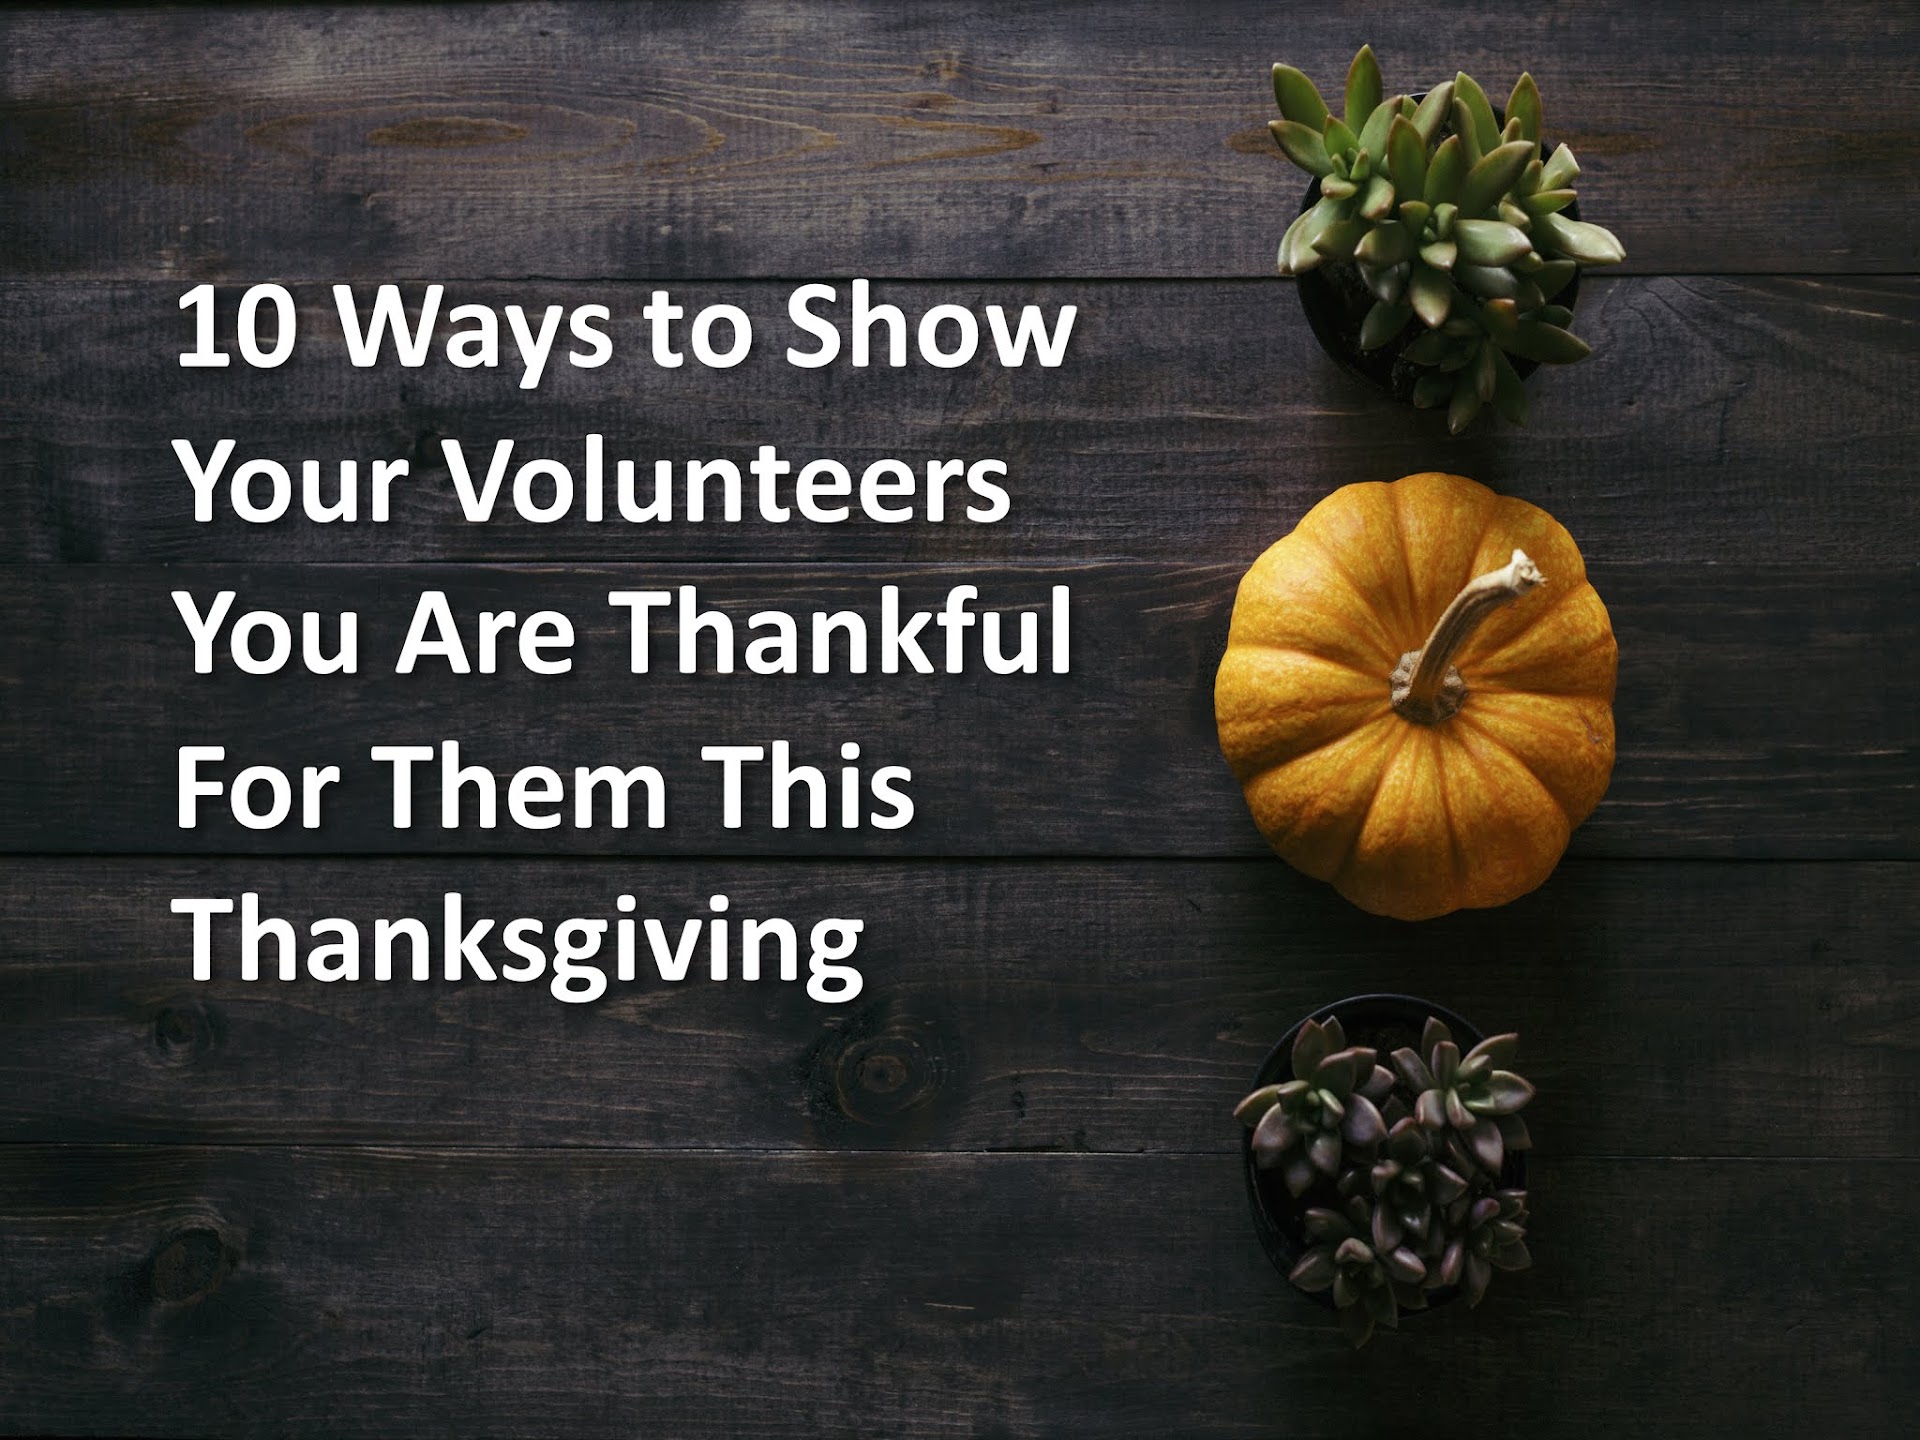 10 Ways to Show Your Volunteers You Are Thankful for Them This